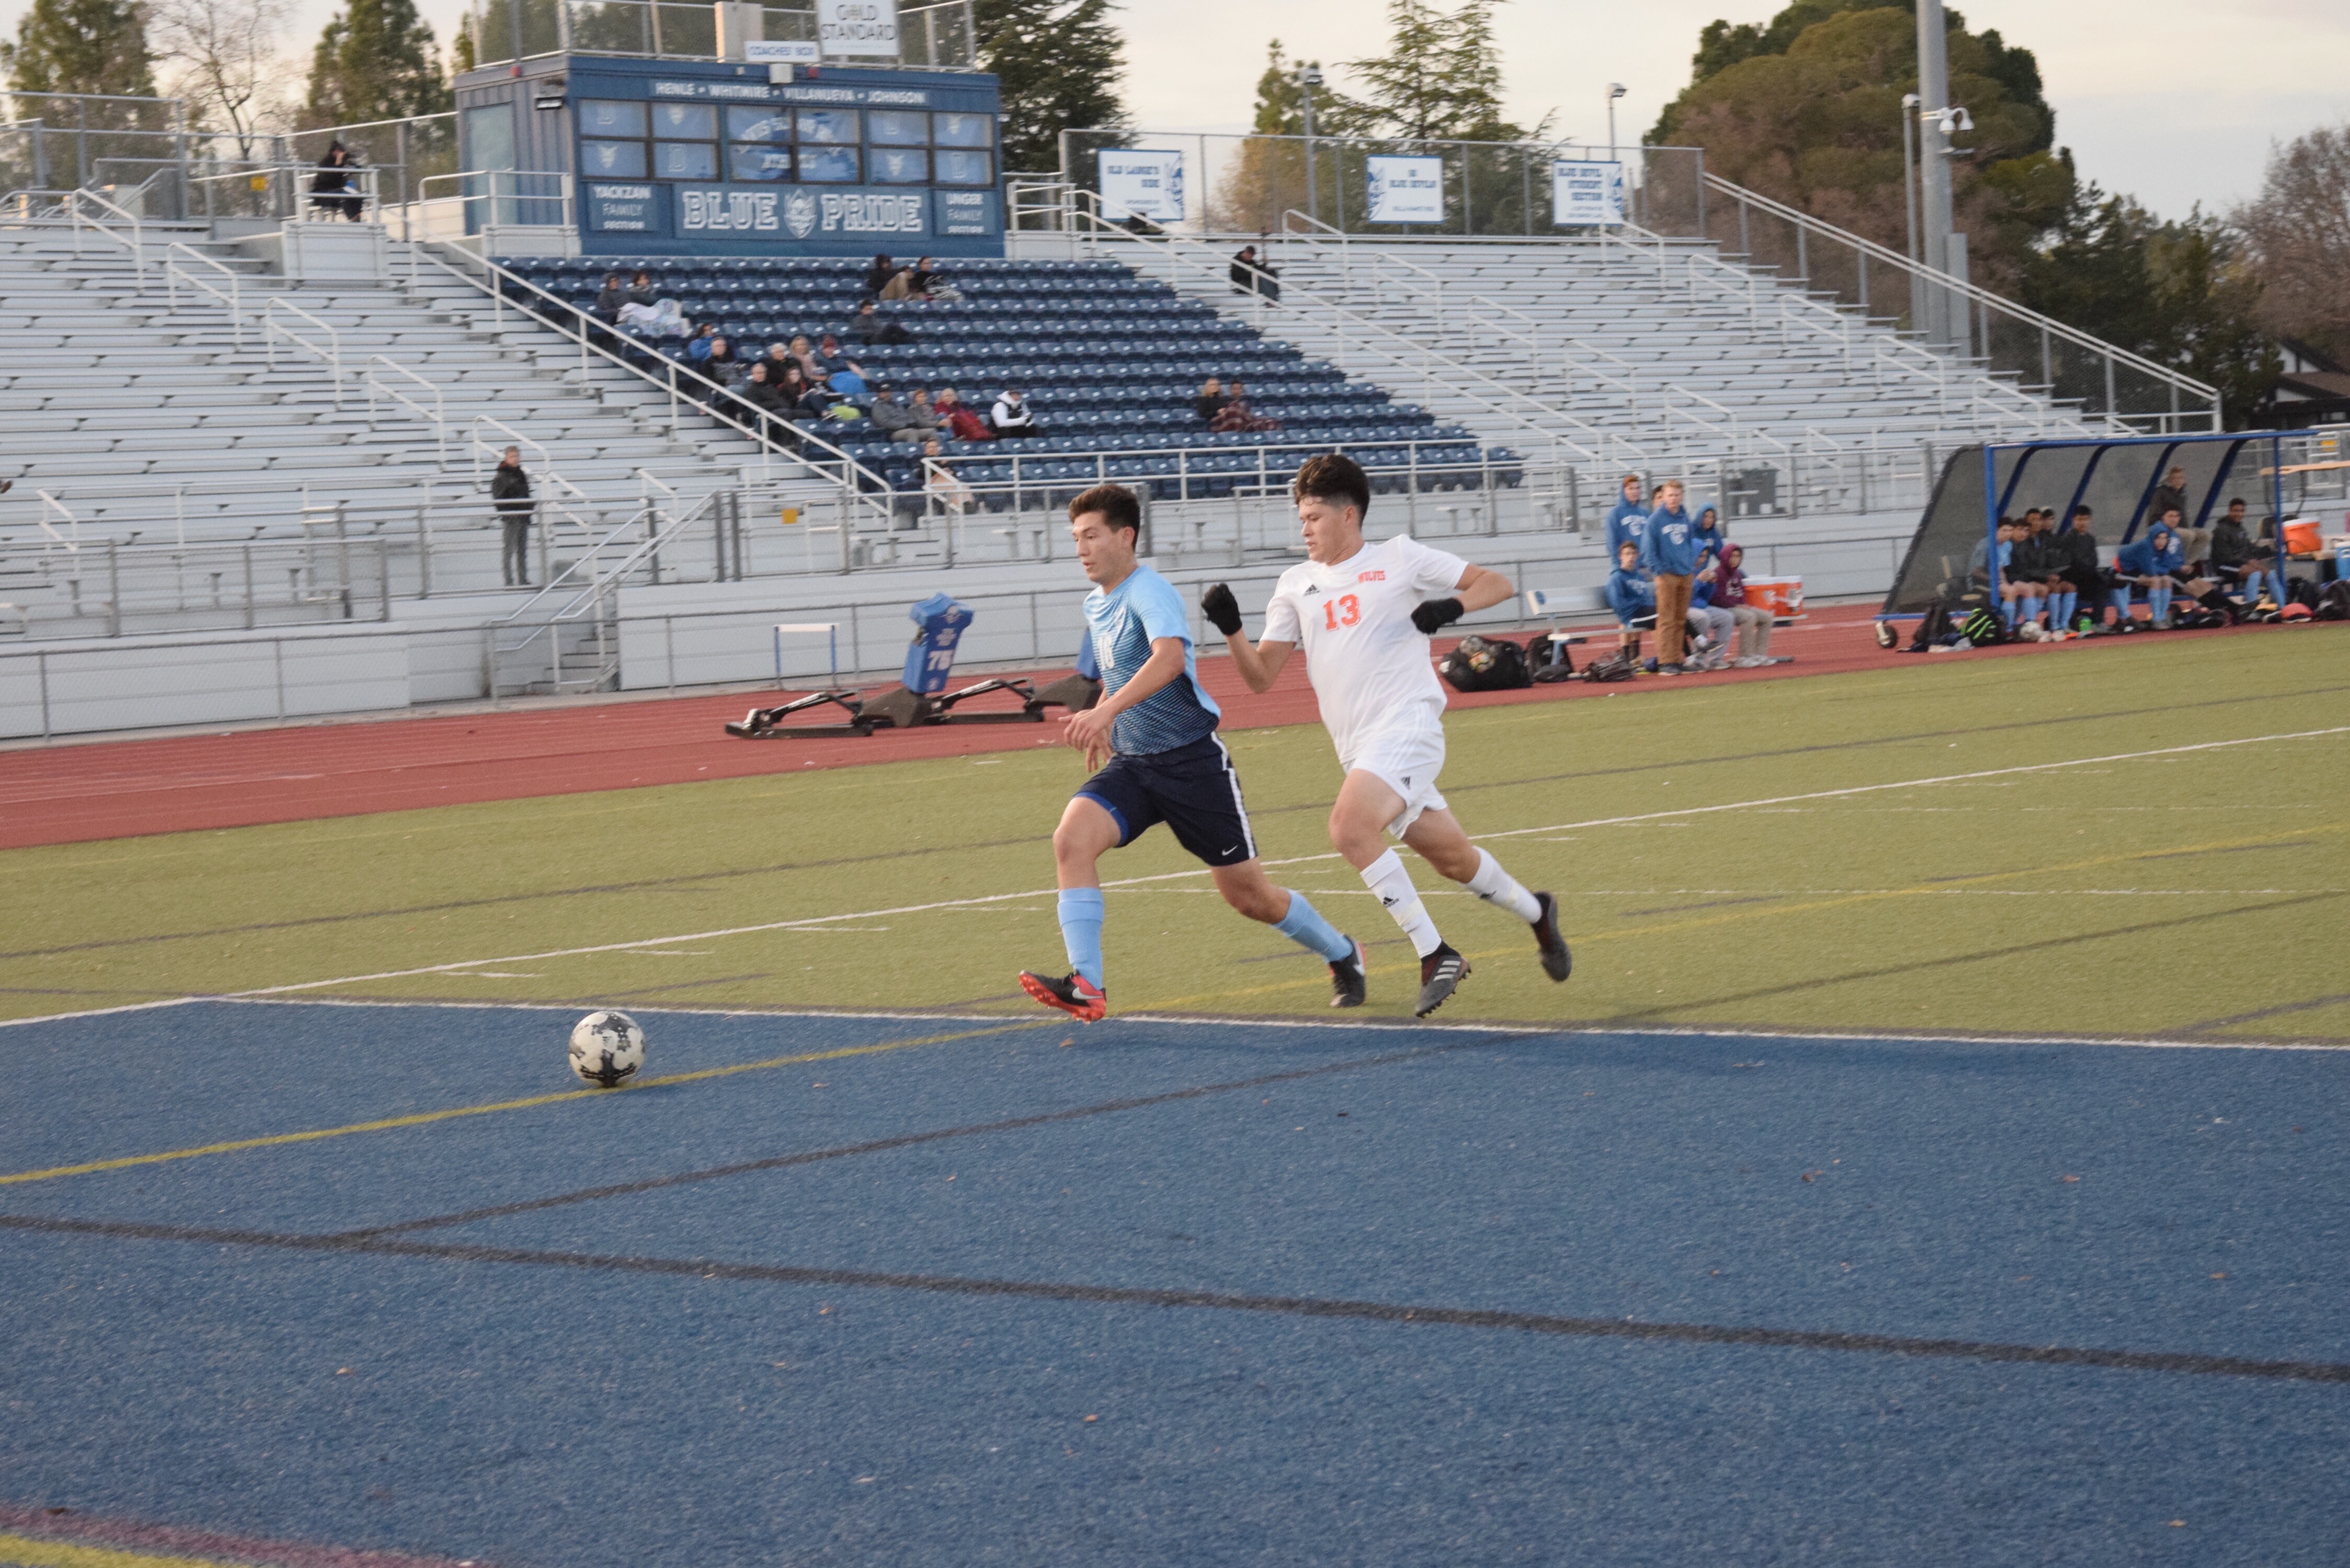 Senior Connor McCarty races for the ball down the sideline.